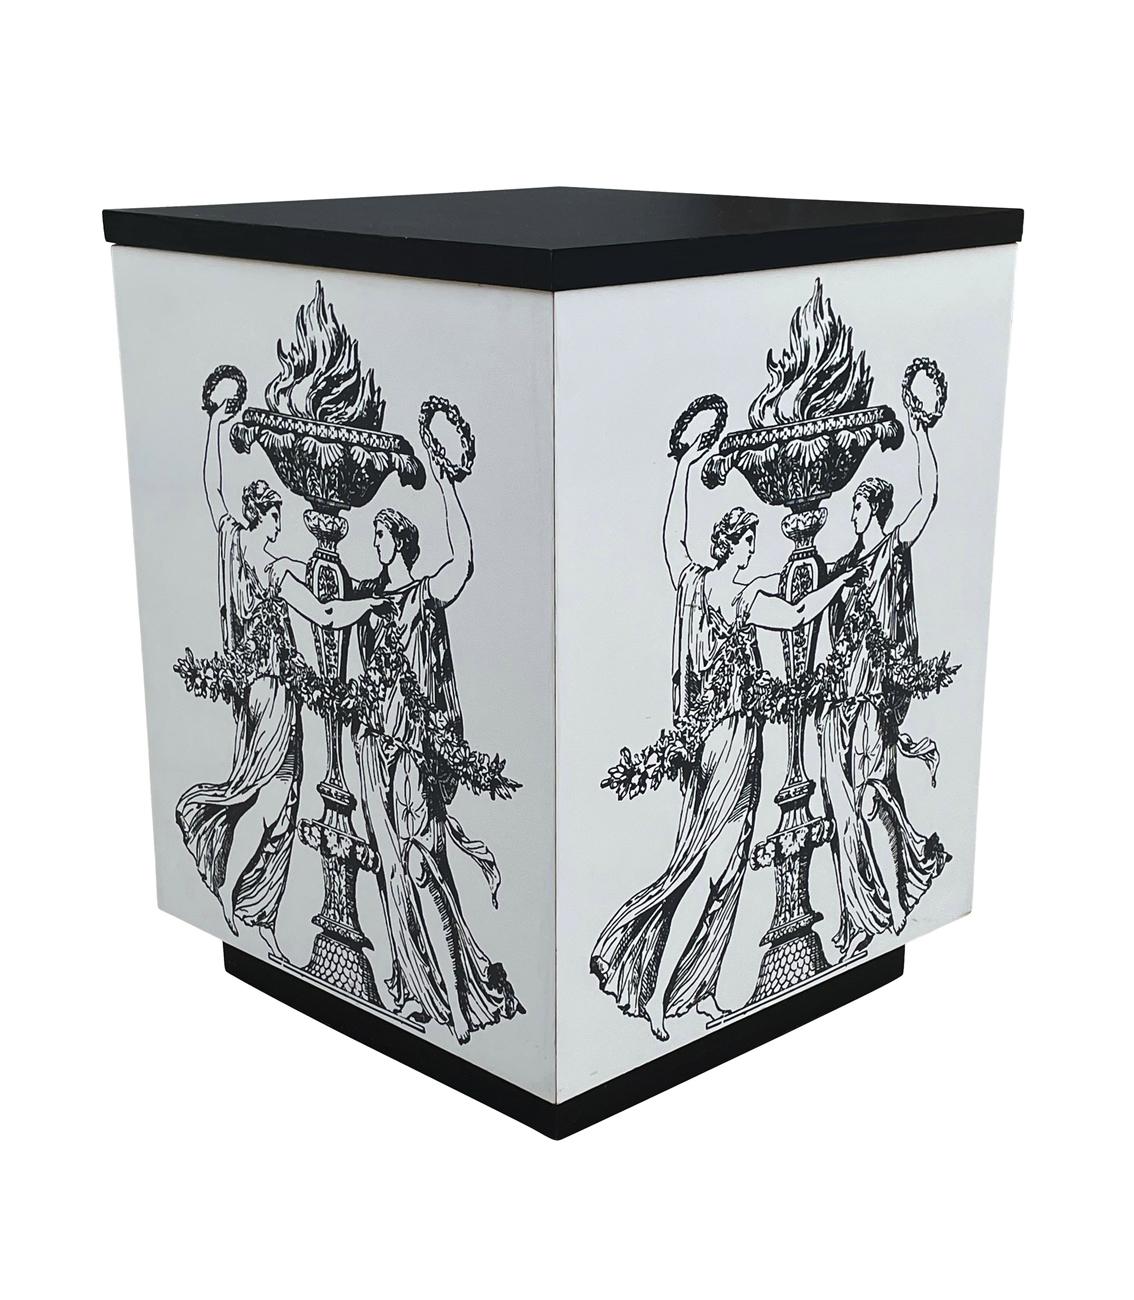 Pair Mid Century Italian Modern Storage Cube End Tables after Piero Fornasetti In Good Condition For Sale In Philadelphia, PA